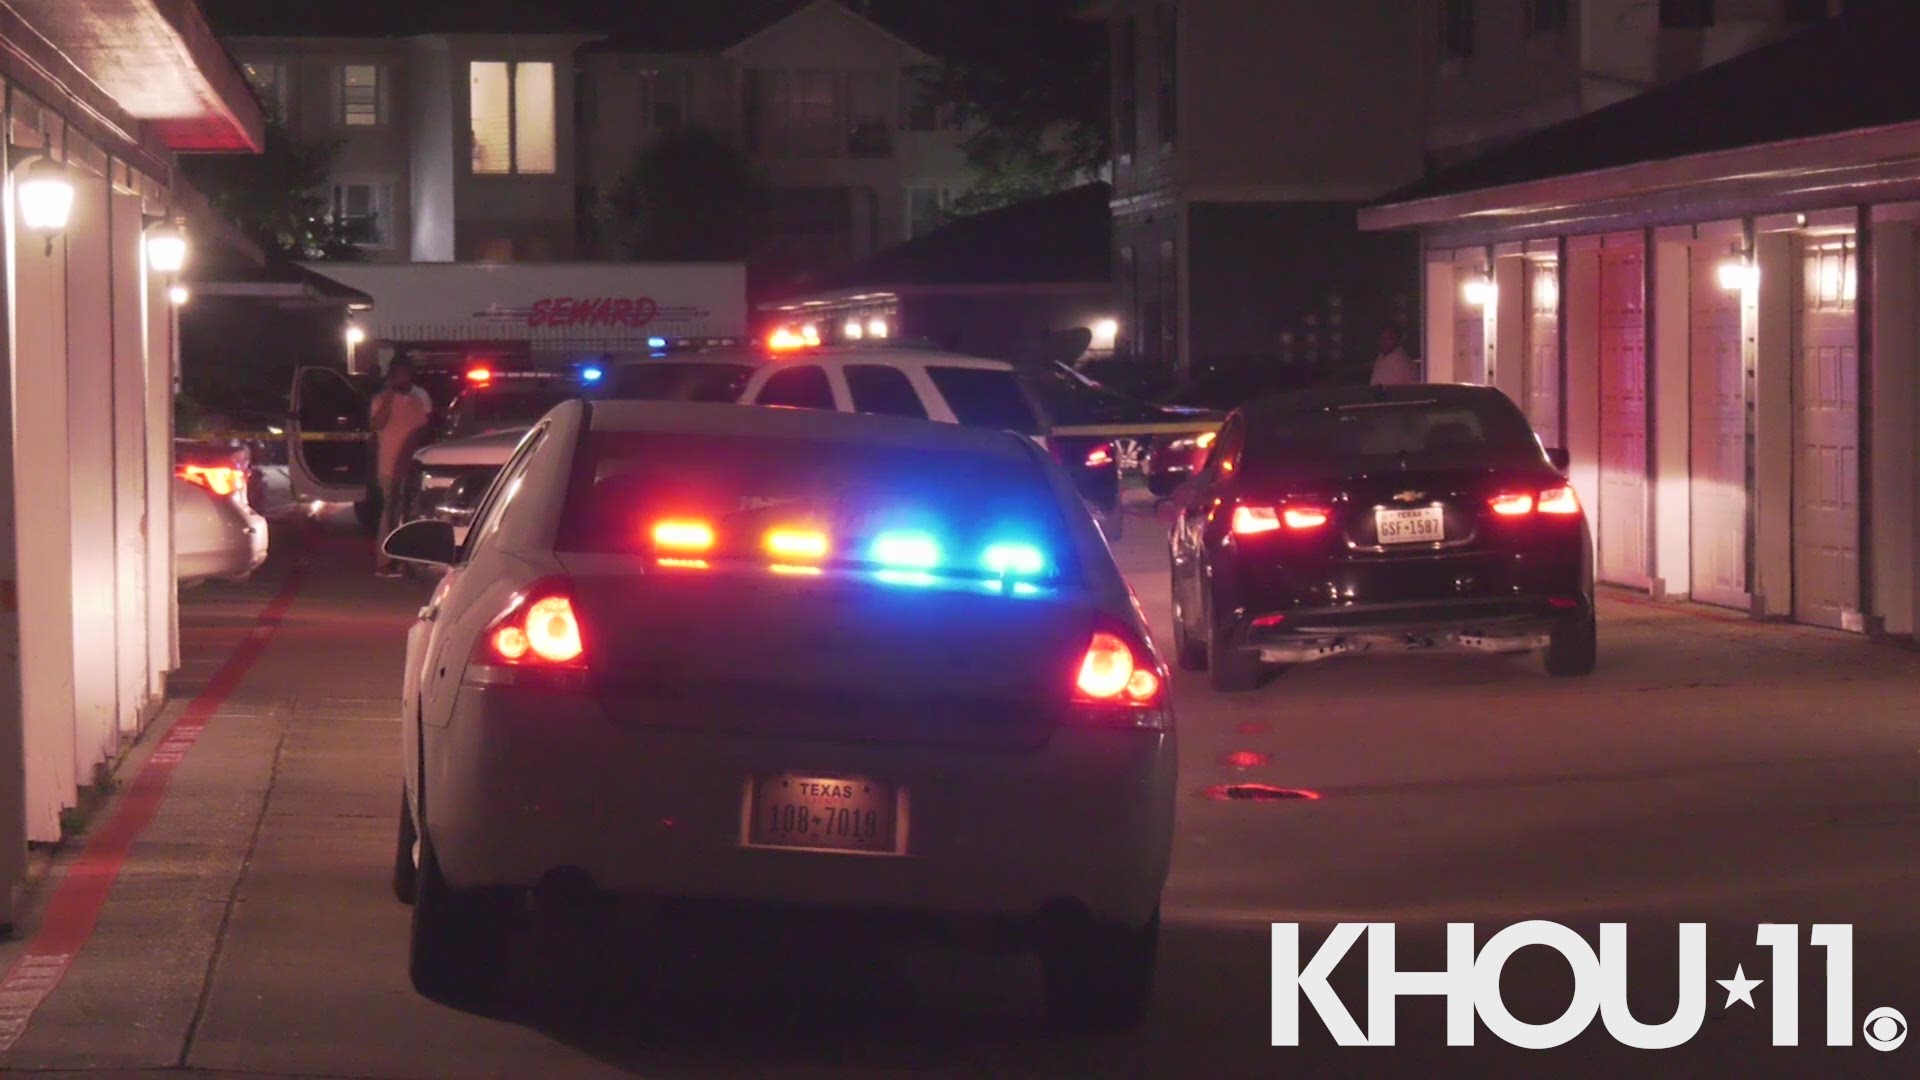 Harris County Sheriff’s deputies are investigating a shooting that left one woman dead Tuesday night in north Harris County.